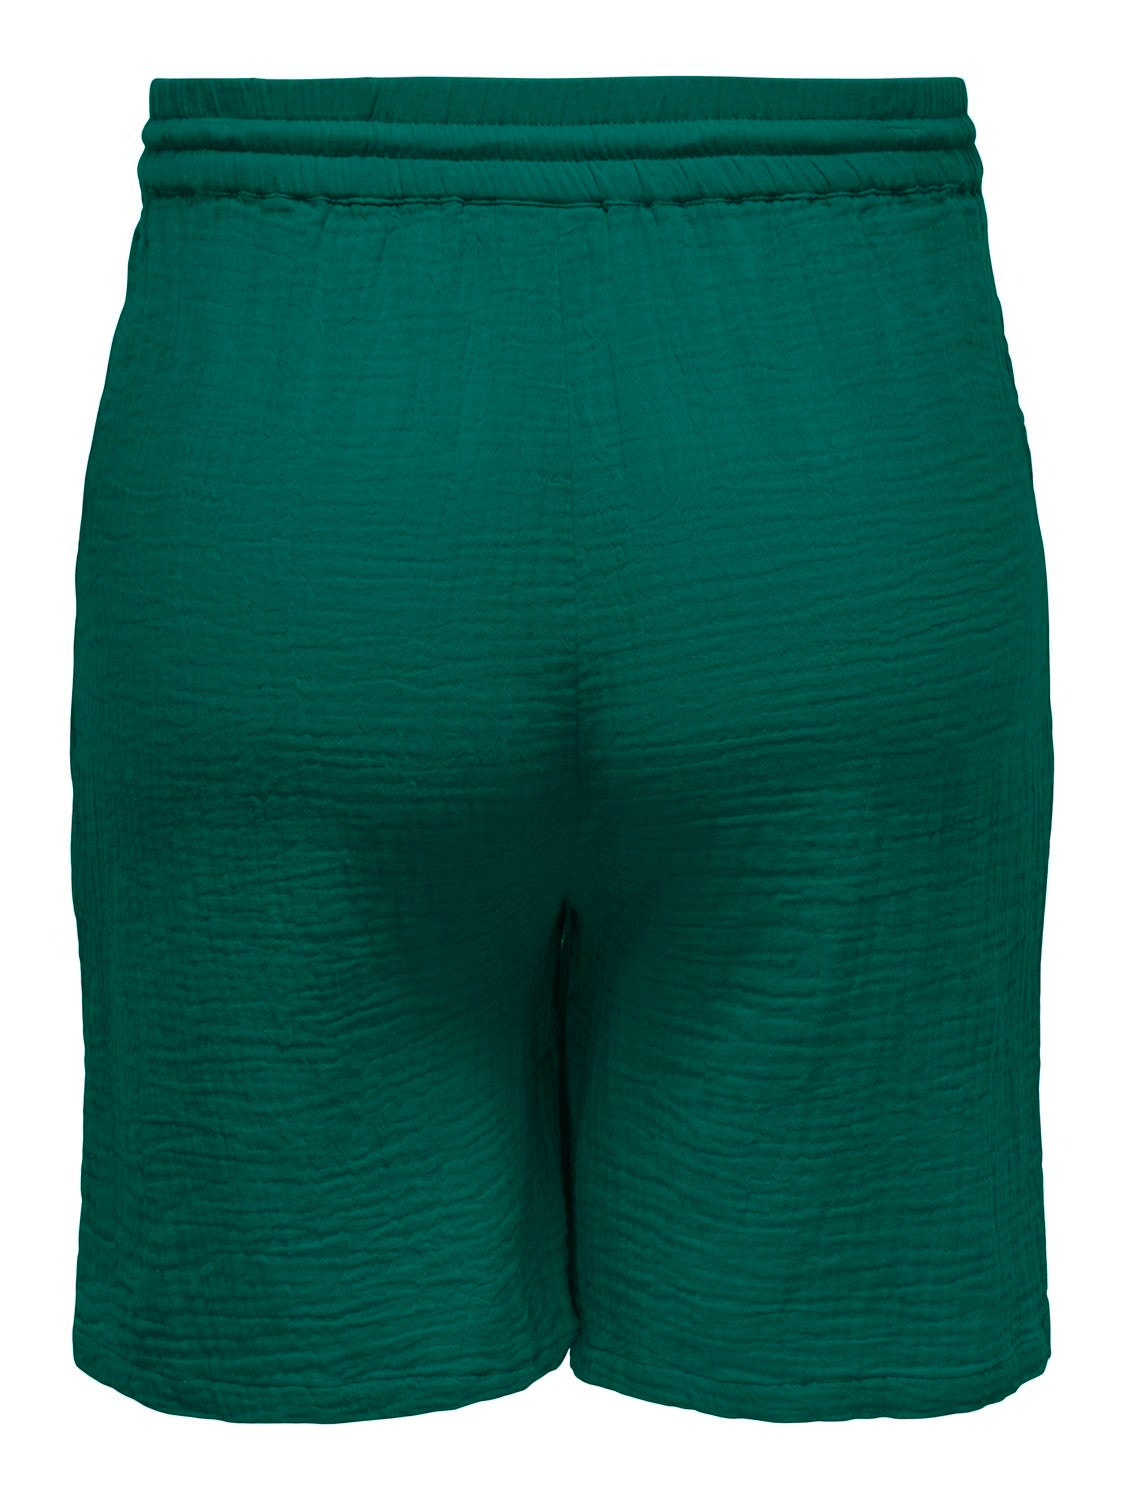 ONLY Normal geschnitten Hohe Taille Curve Shorts -Aventurine - 15326380